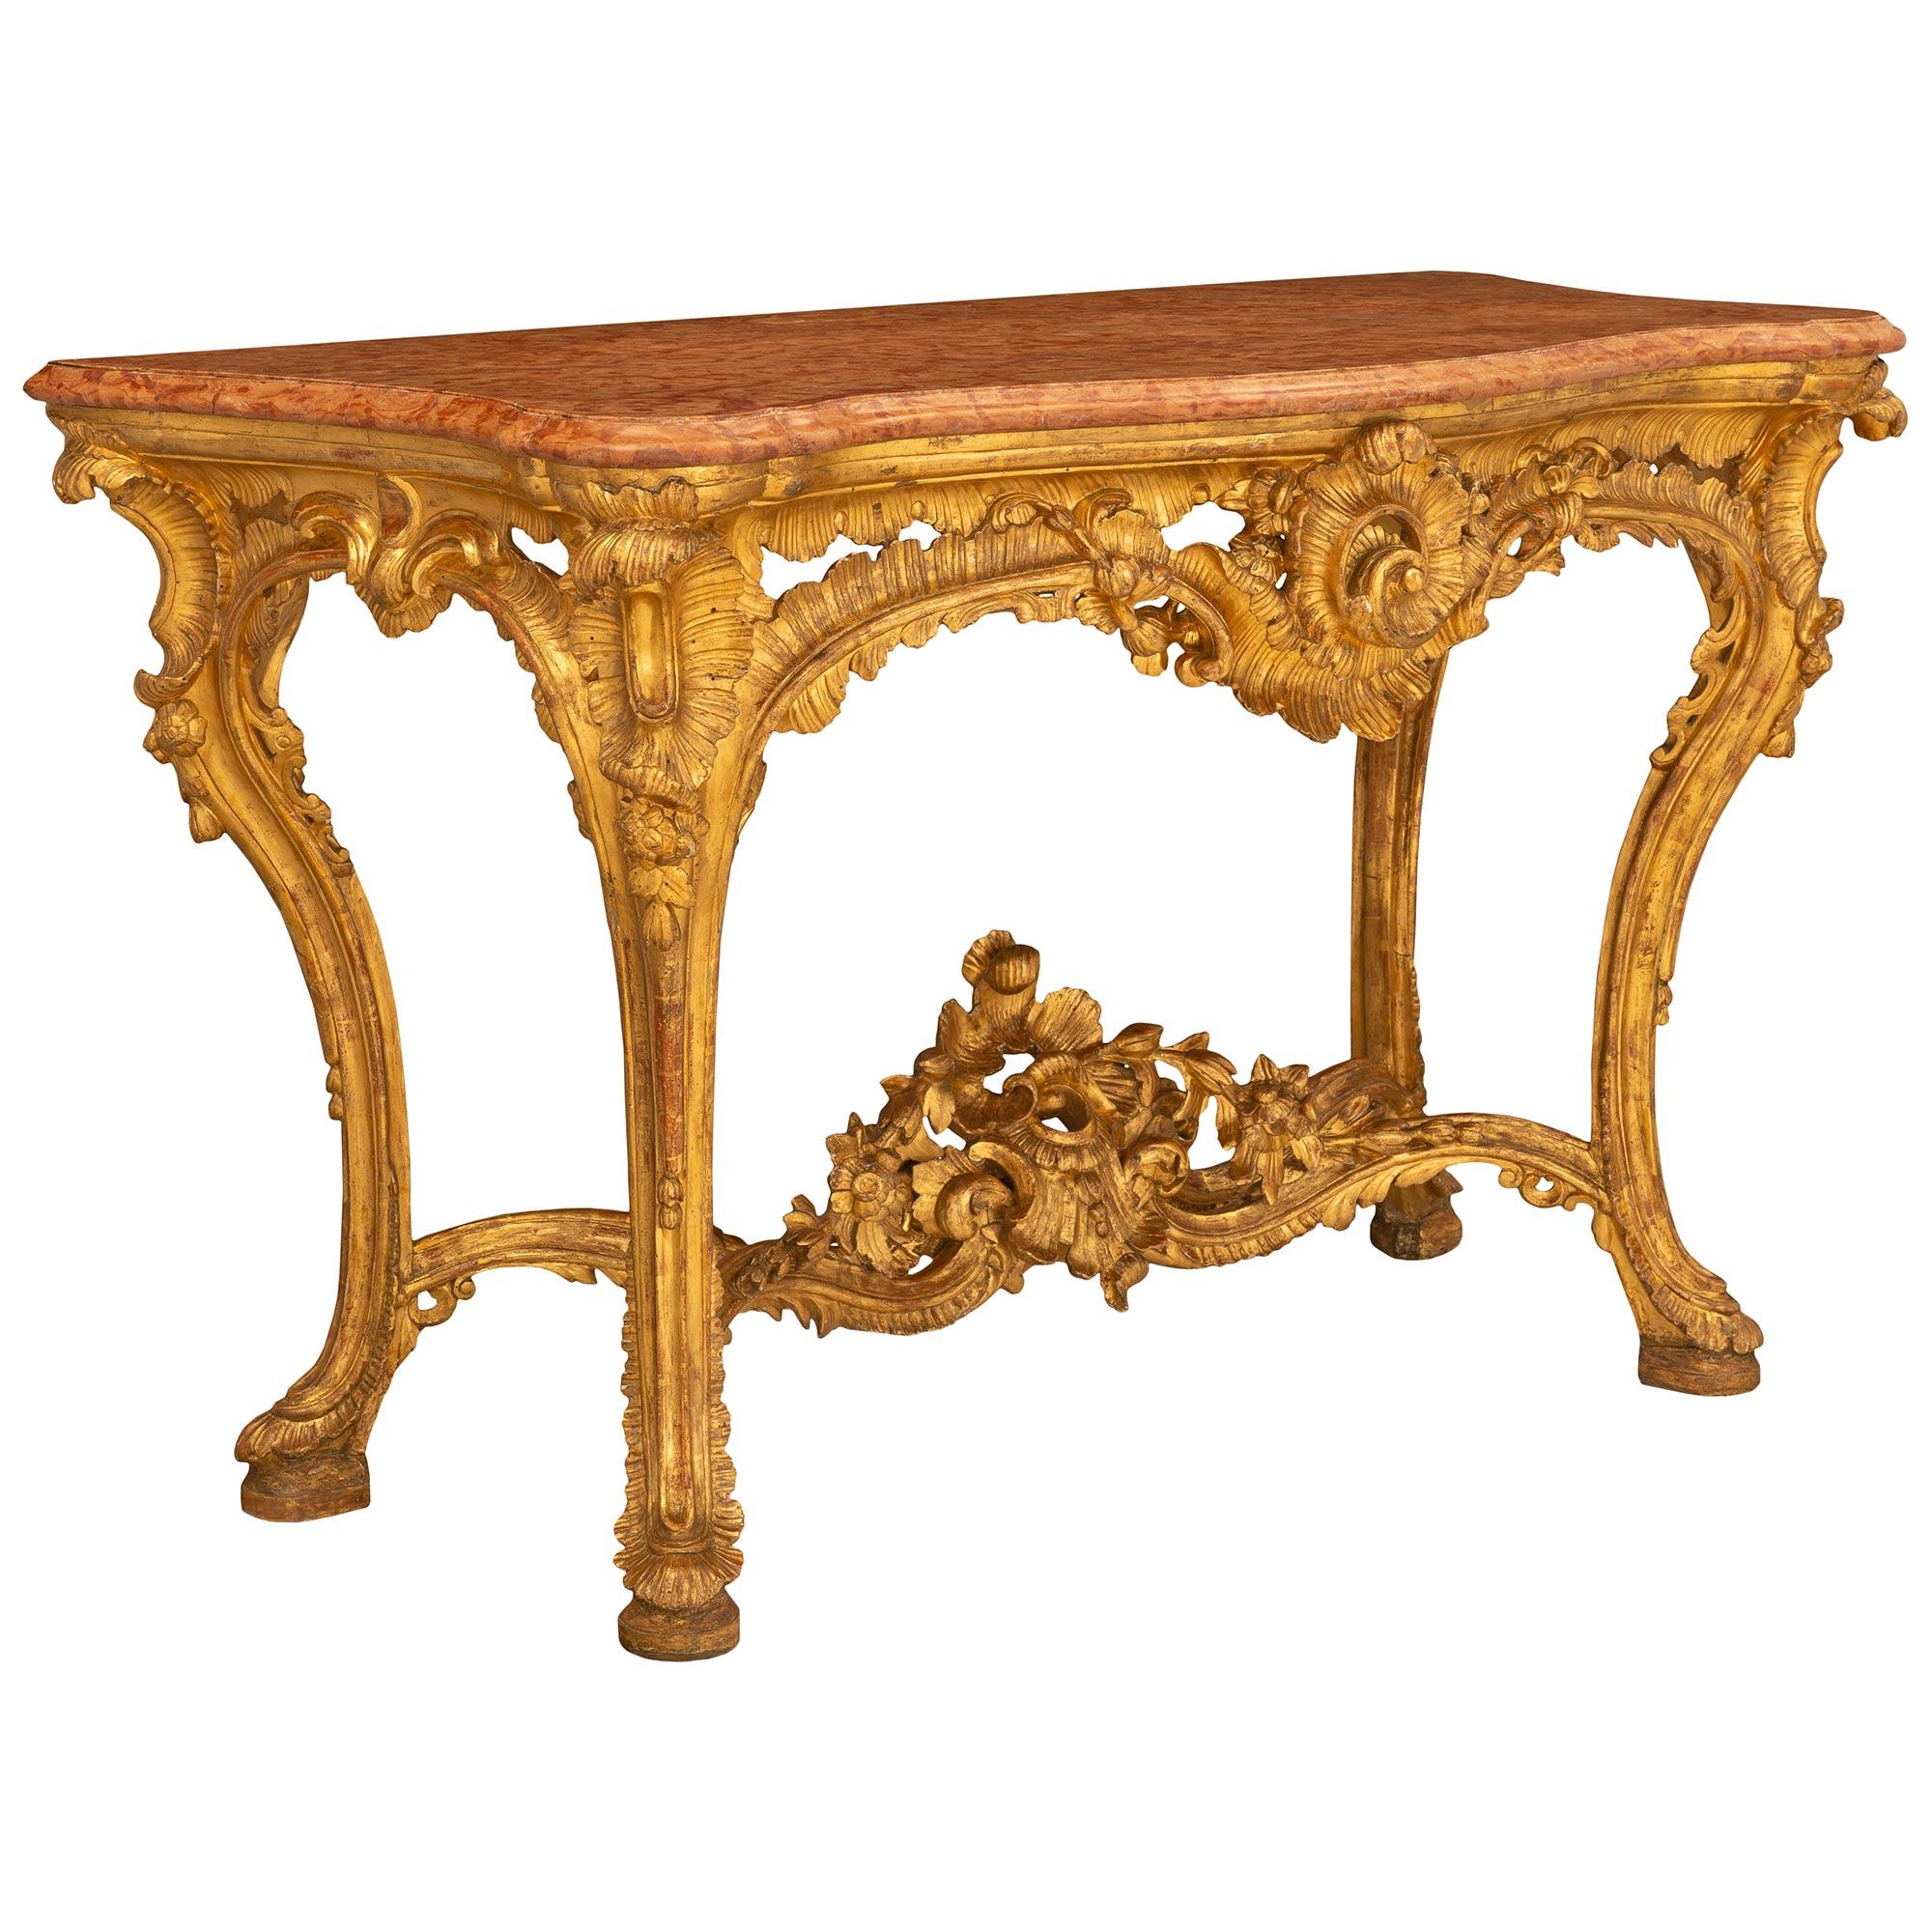 Early 18th Century Italian Napolitan Freestanding Giltwood Console In Good Condition For Sale In West Palm Beach, FL